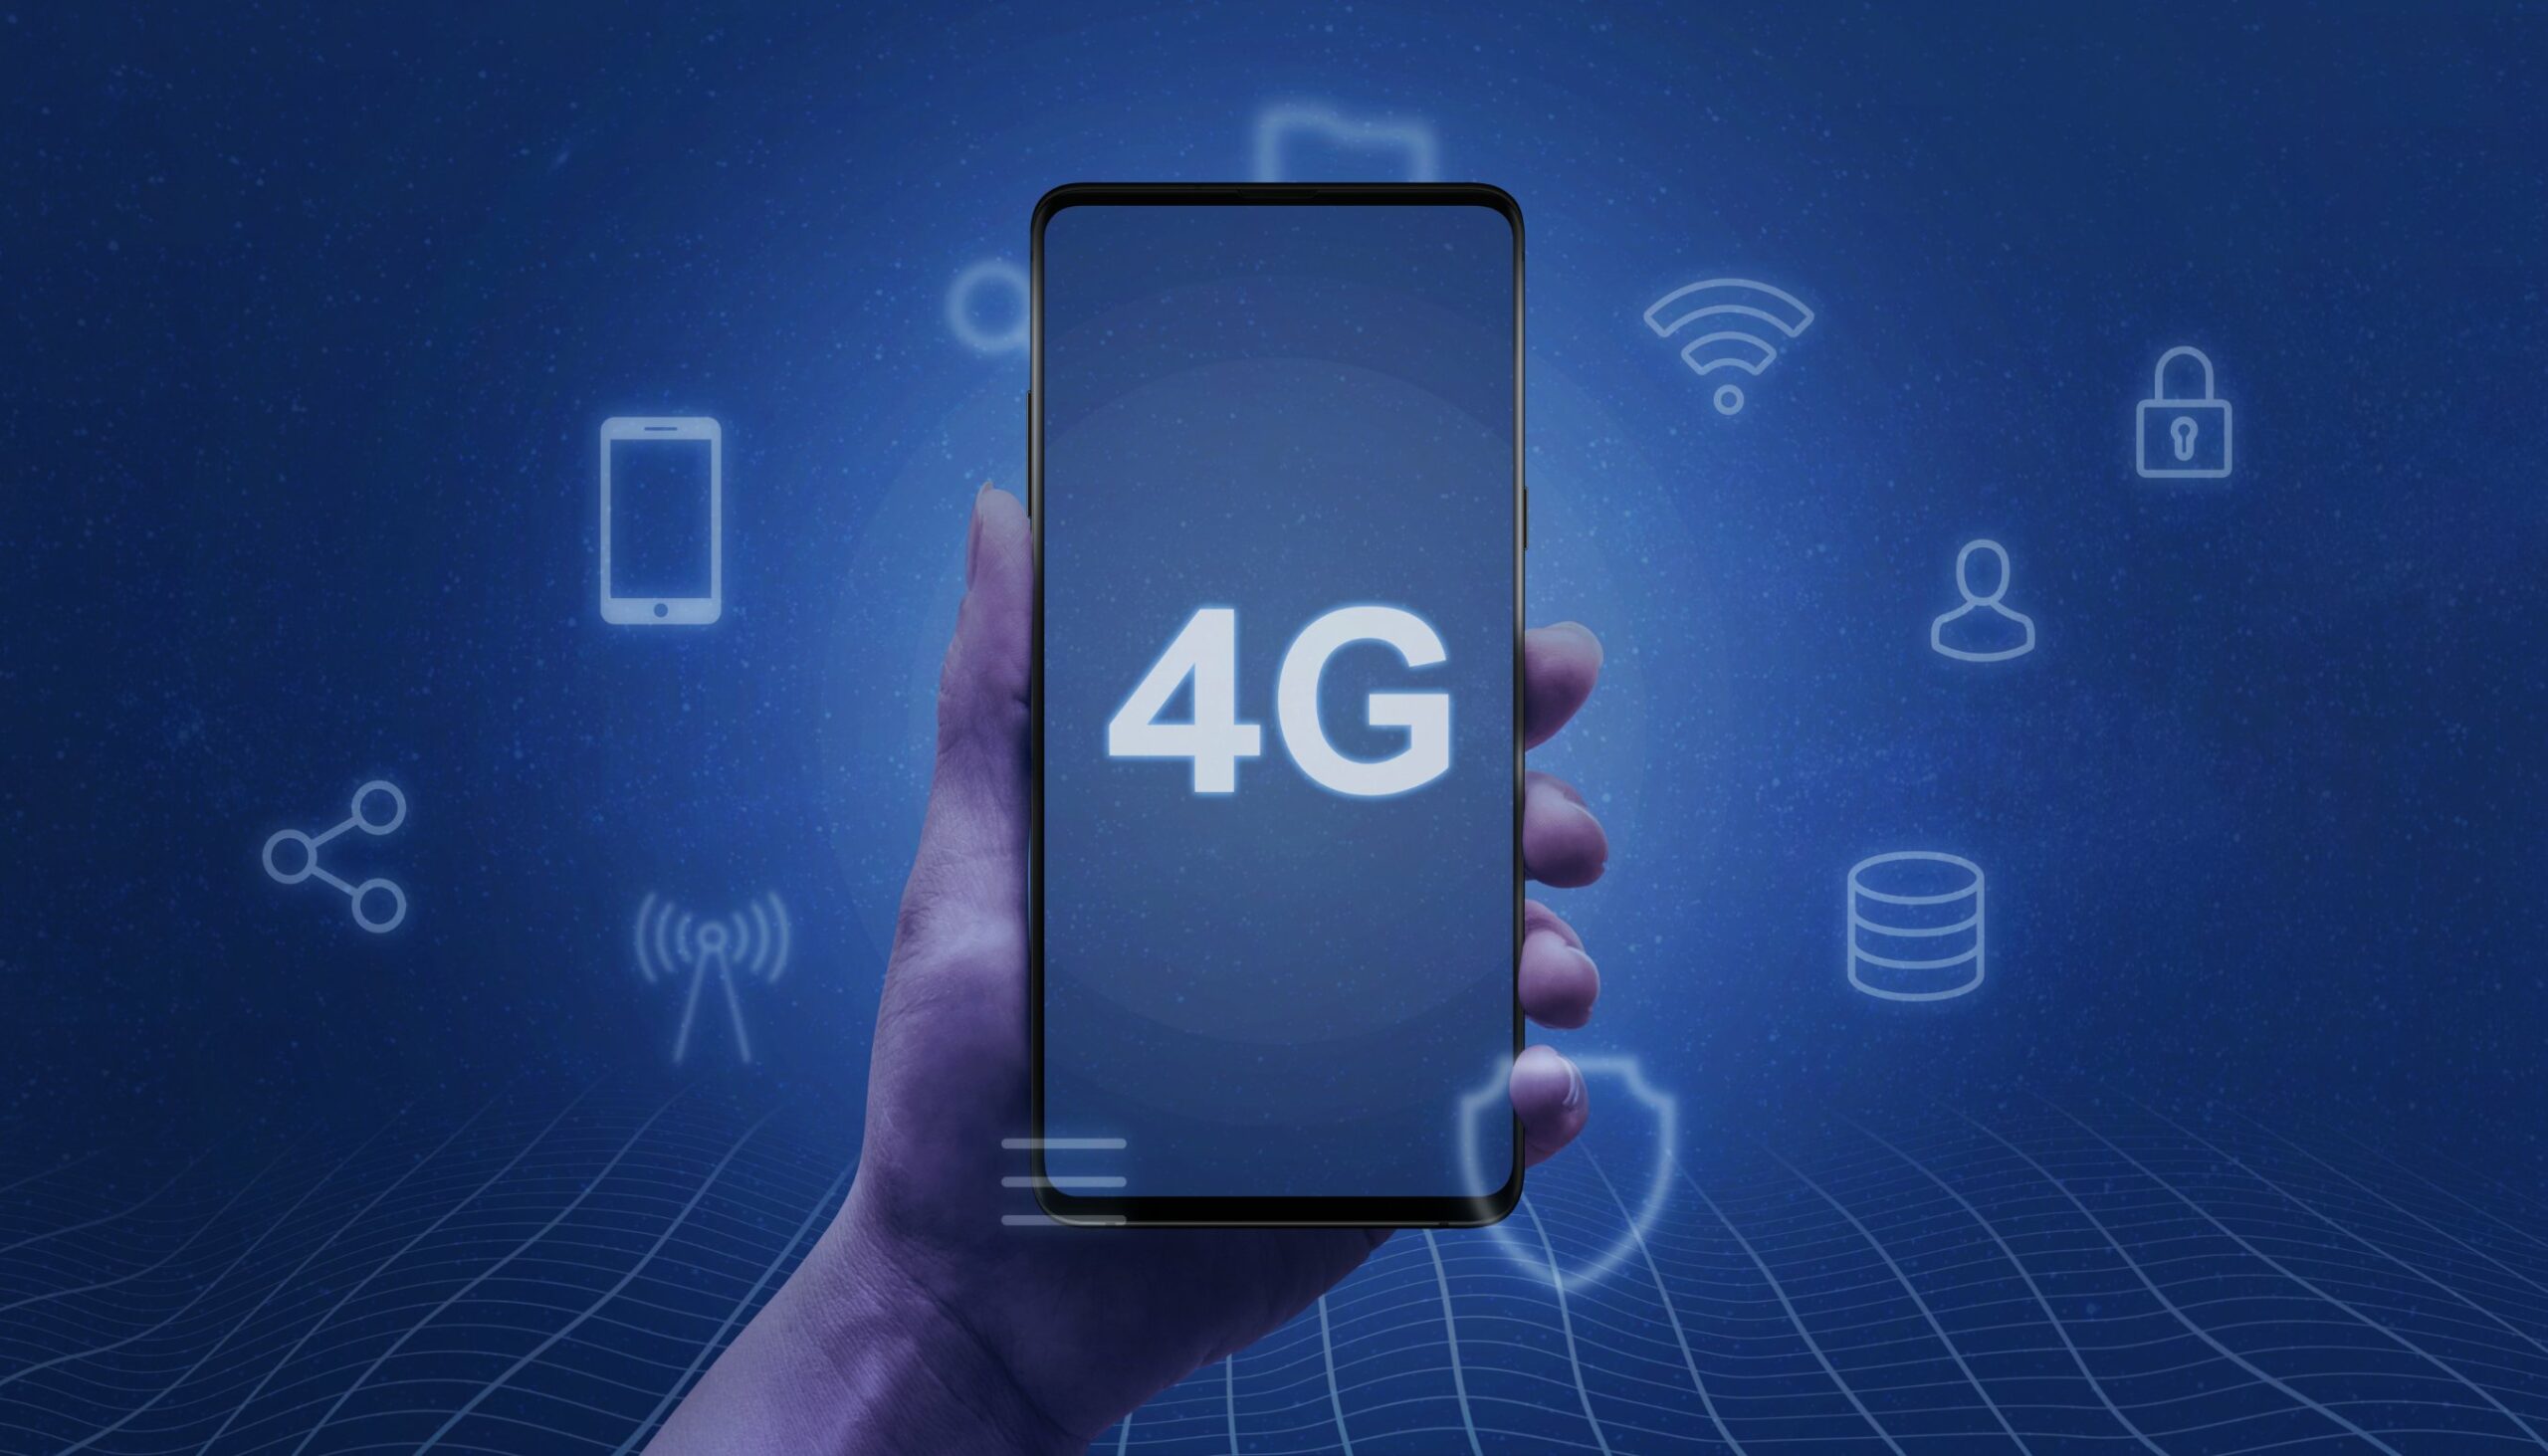 4G and 5G: The clear differences between the two technologies